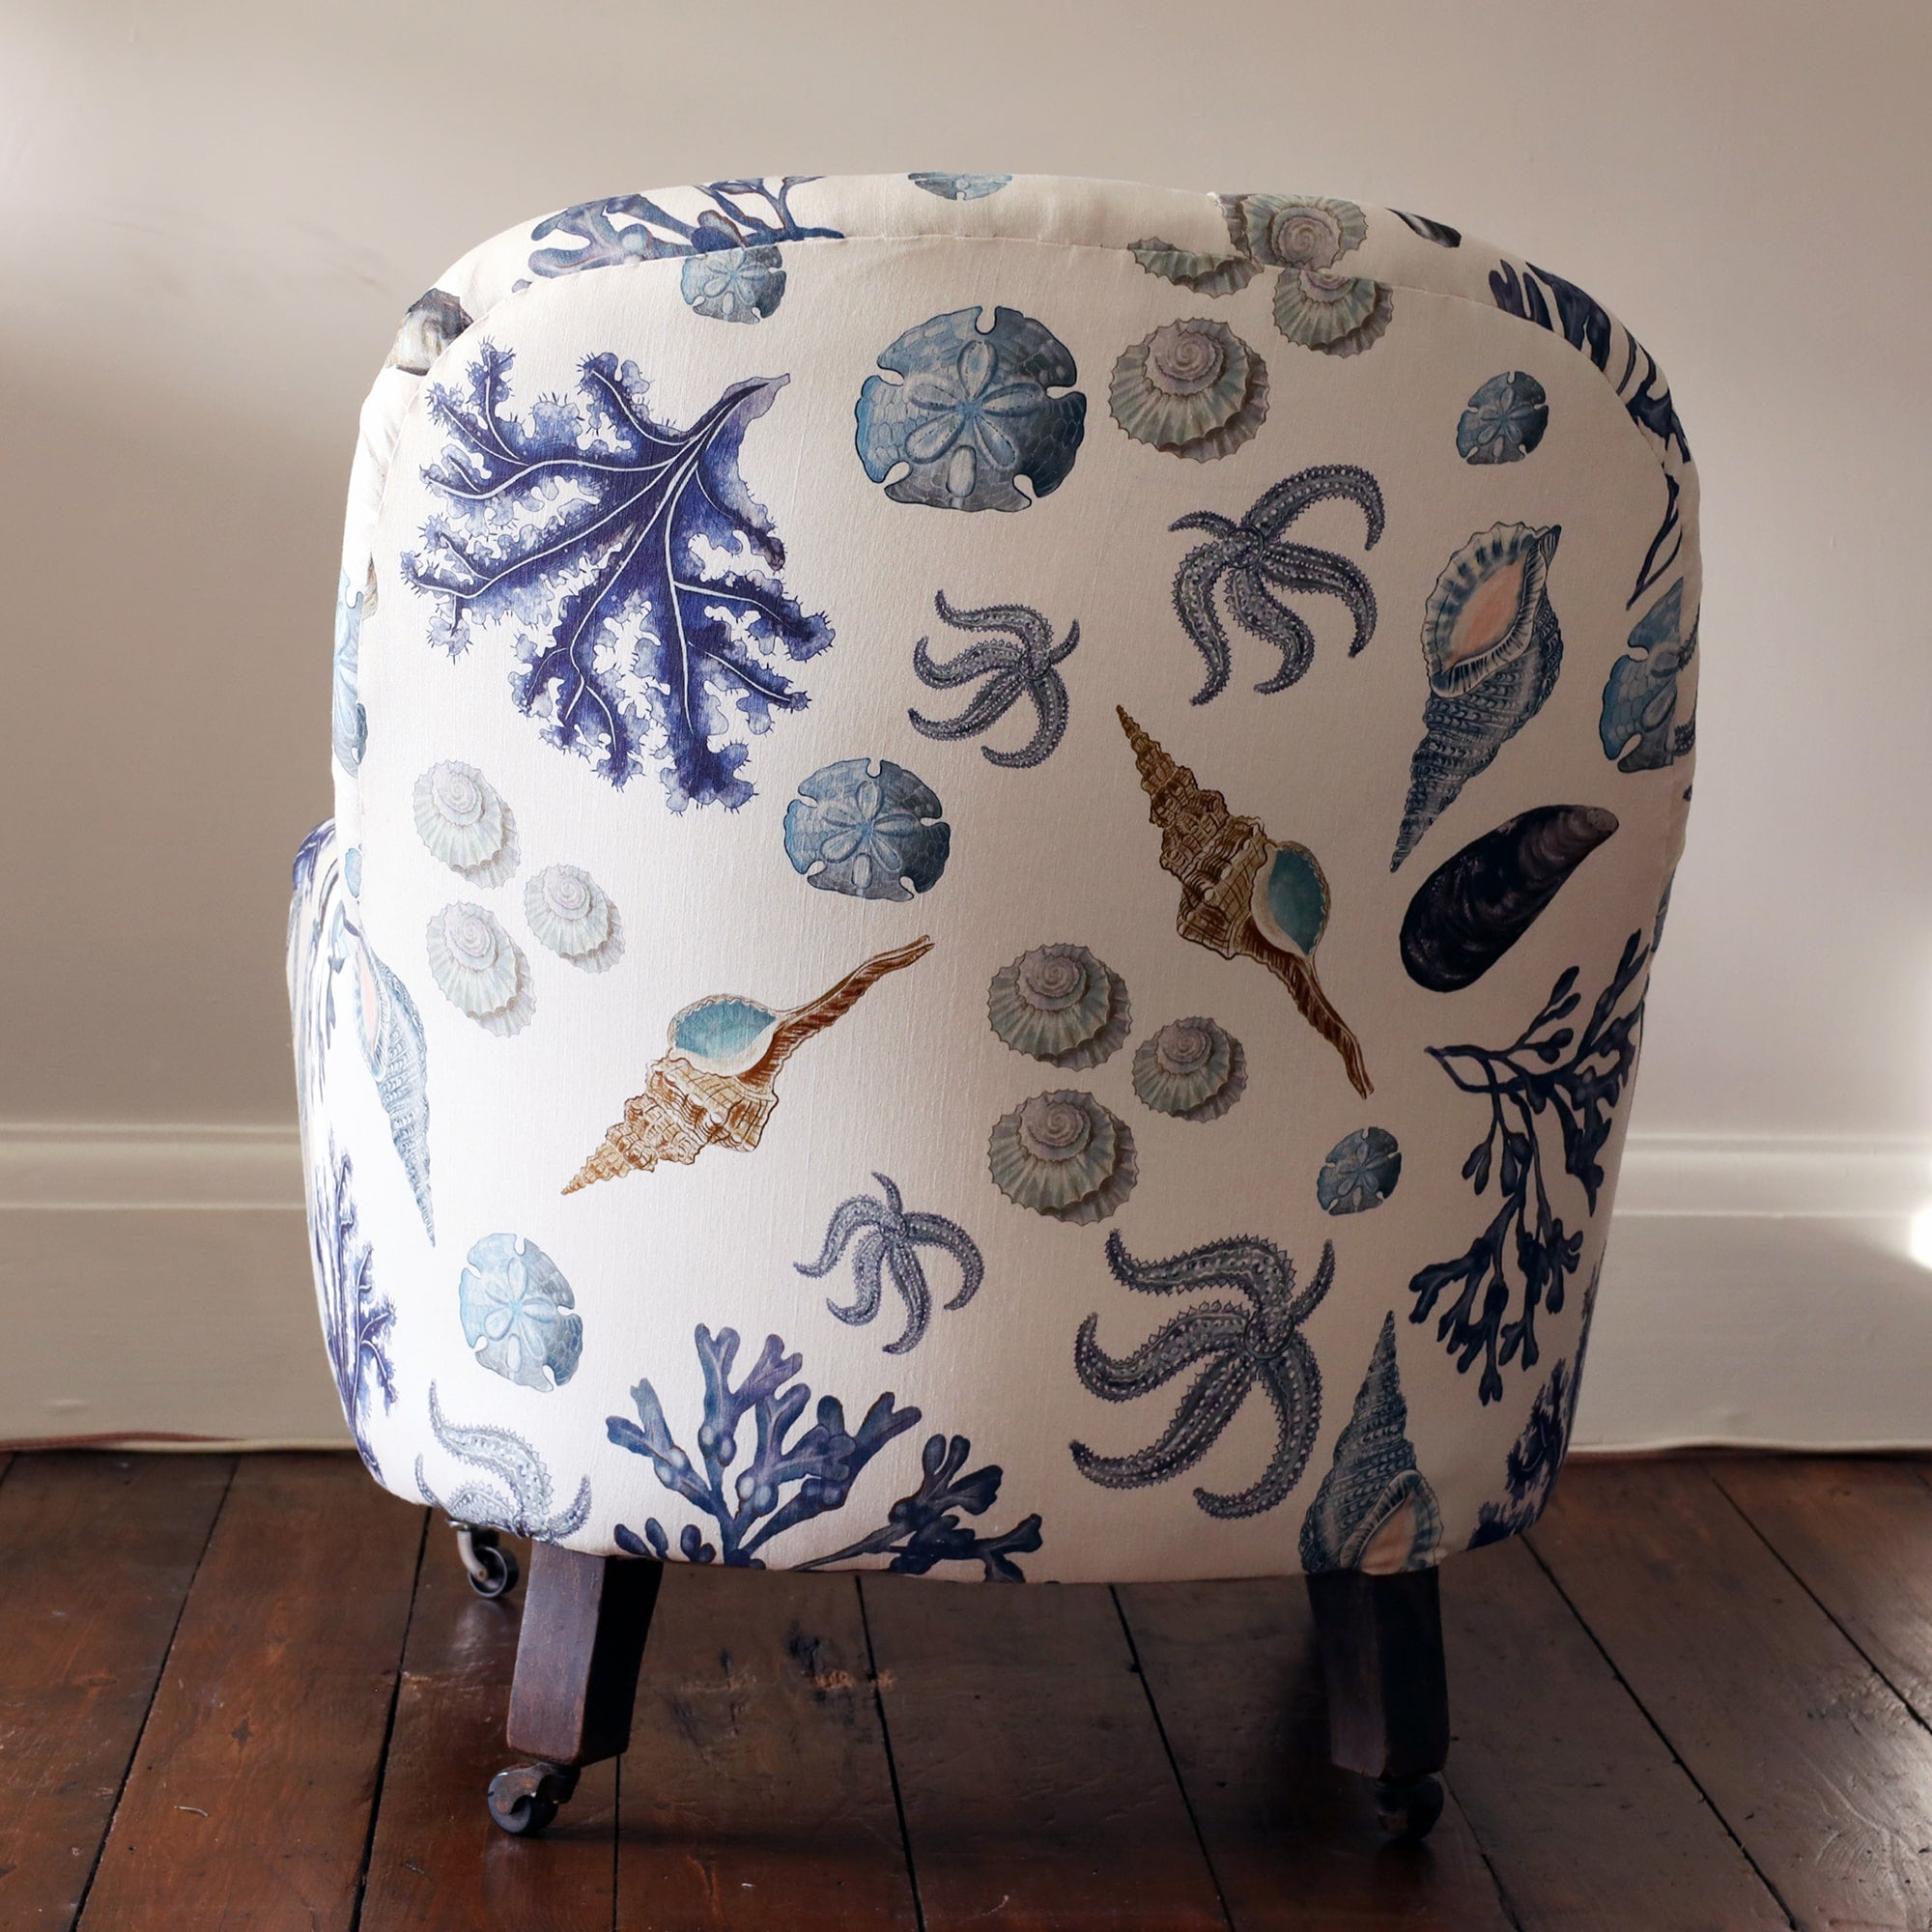 Back view of a re upholsterd victorian button back armchair covered in a shell and seaweed fabric in blue tones on an off white background.